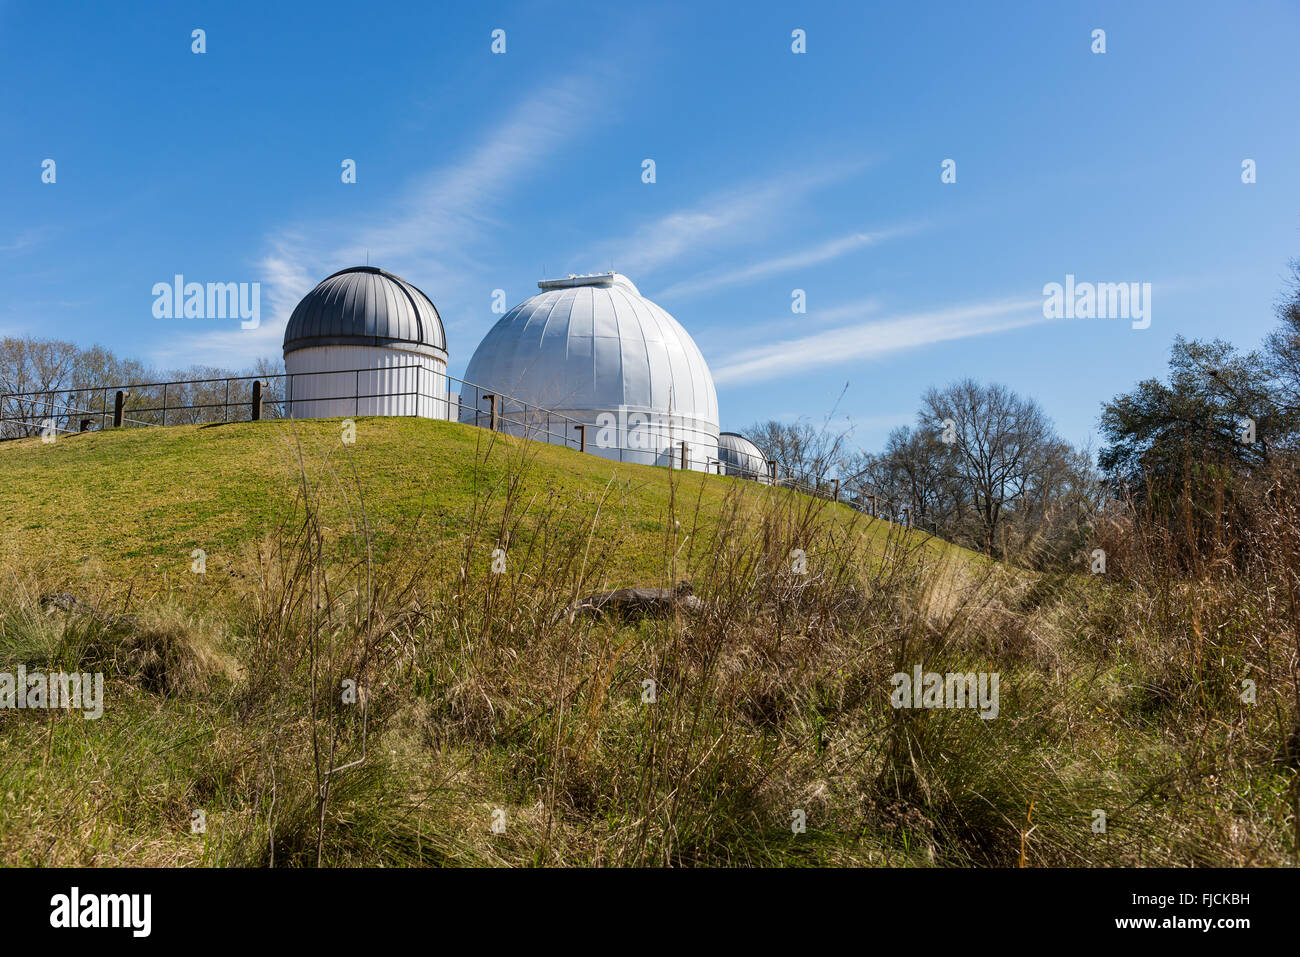 The George Observatory located at Brazos Bend State Park, Houston, Texas, USA. Stock Photo